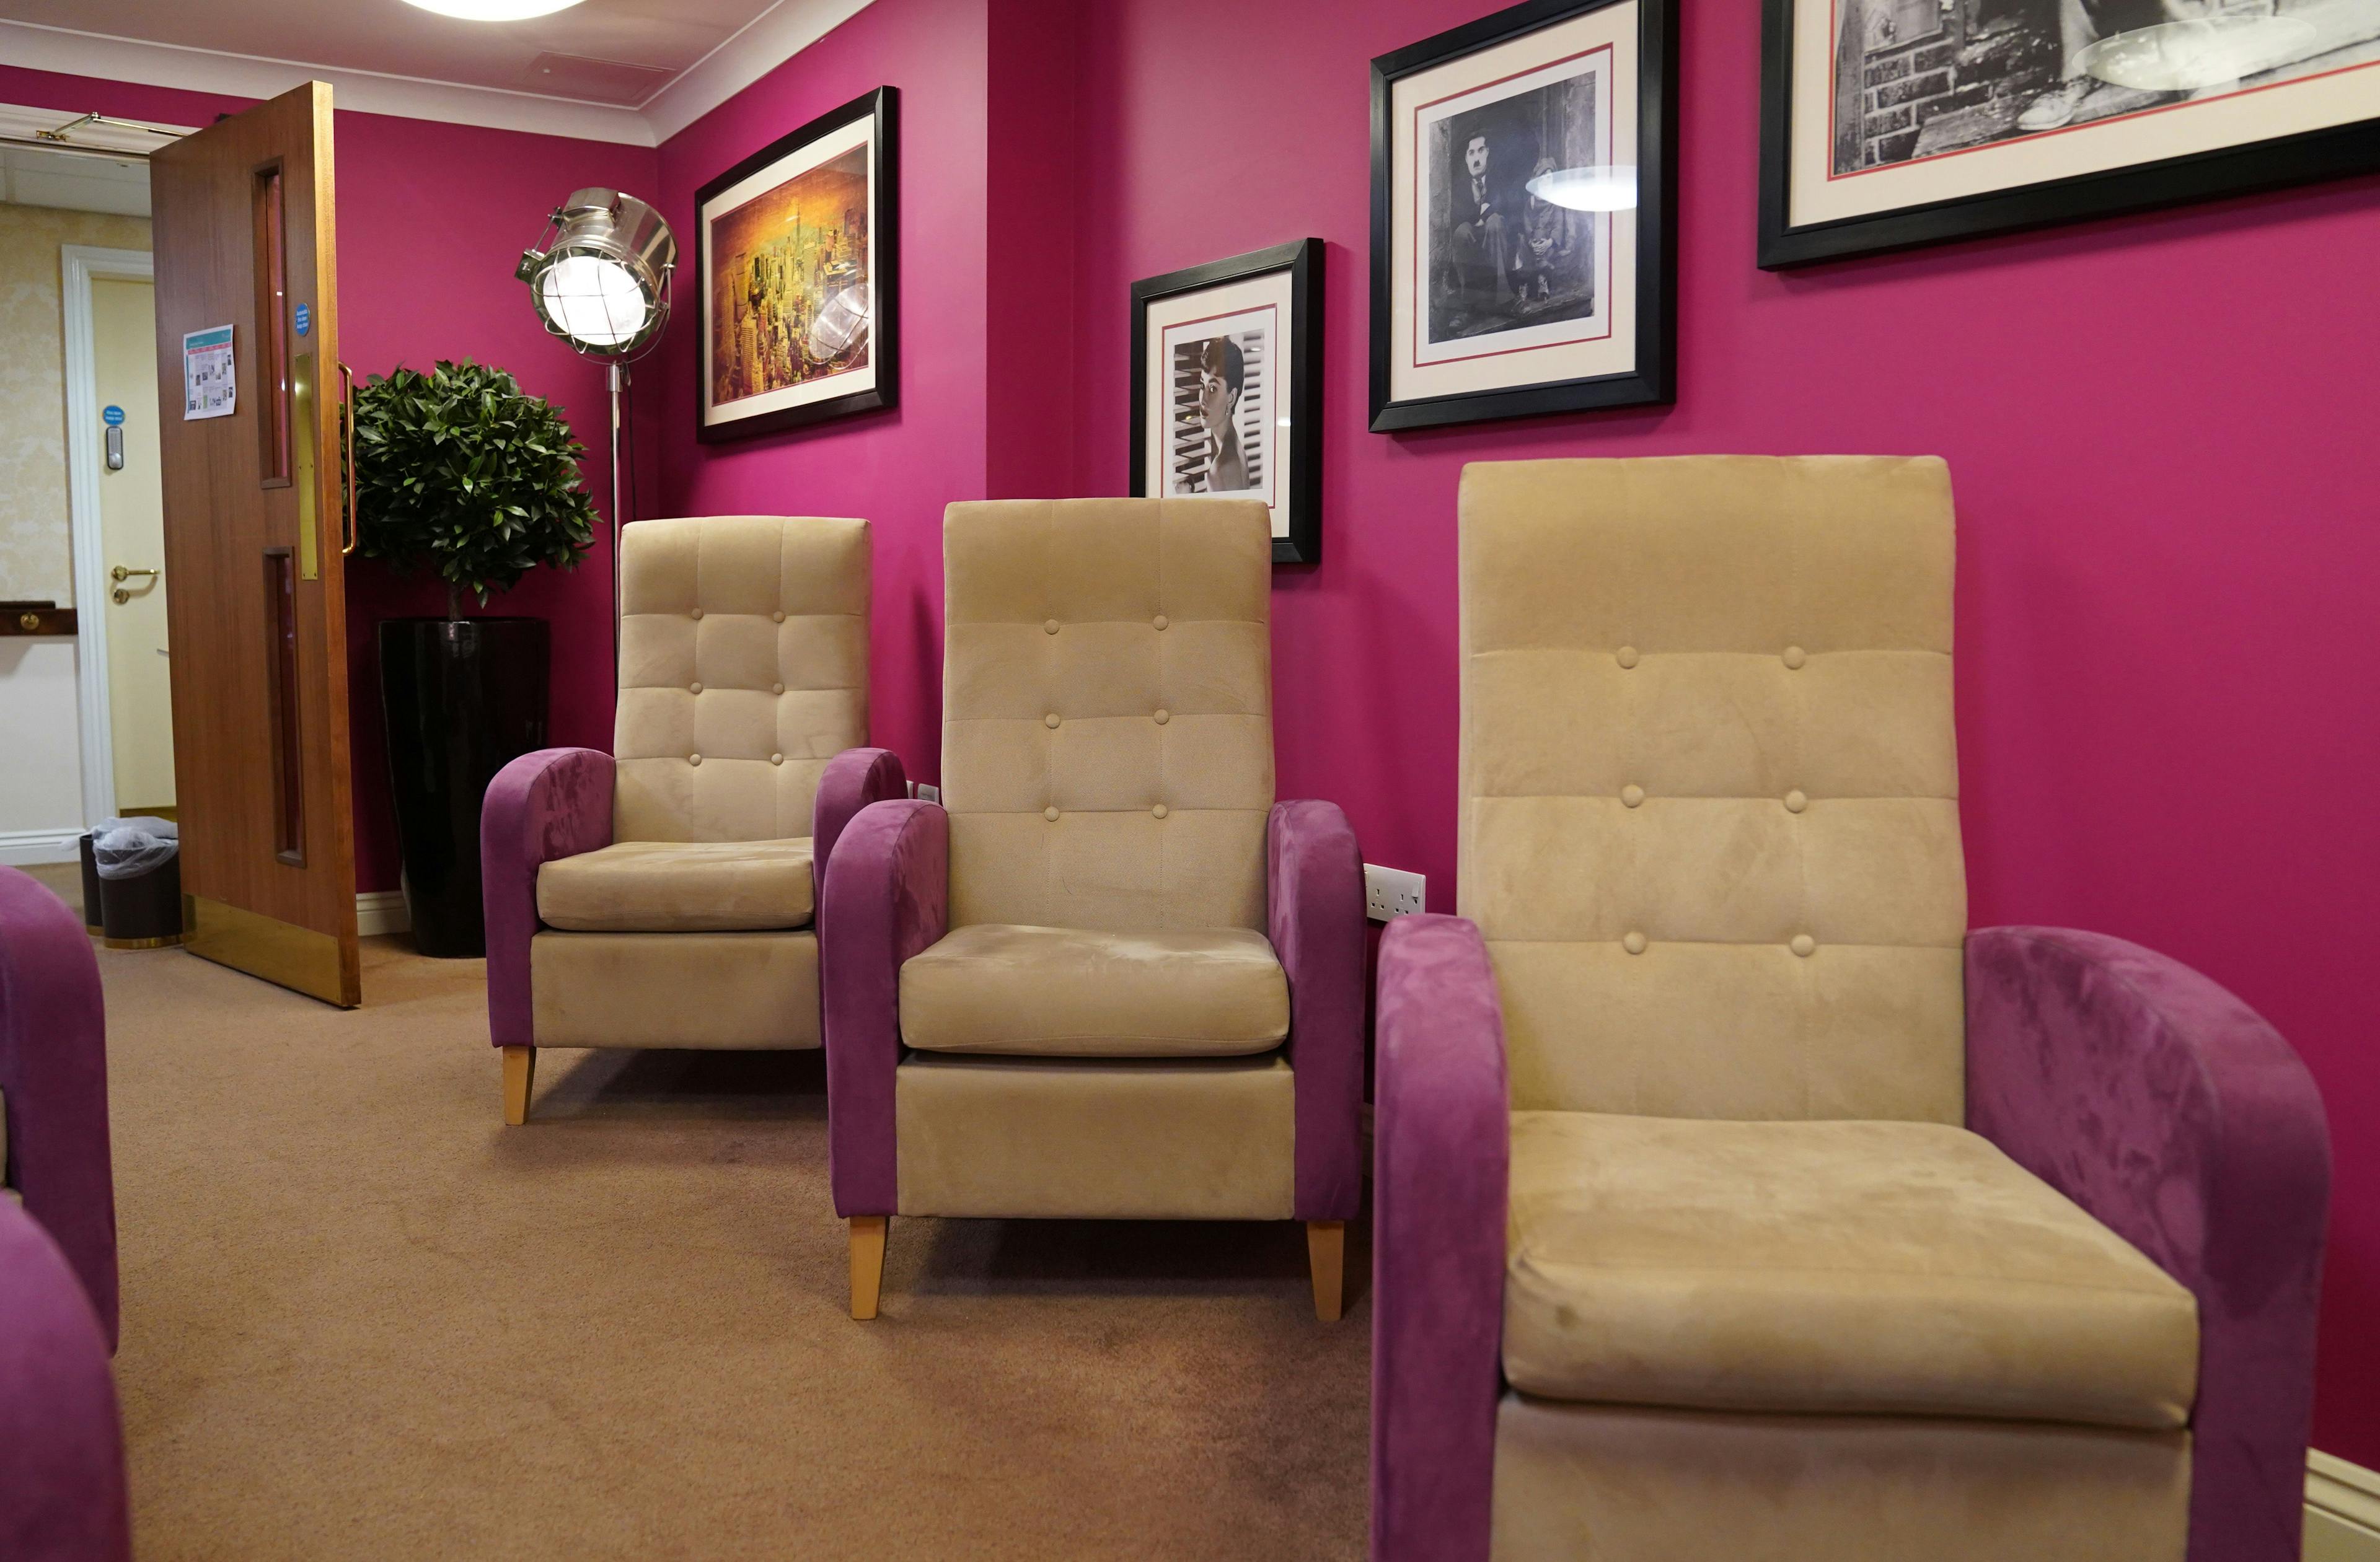 Cinema of Iffley care home in Oxford, Oxfordshire